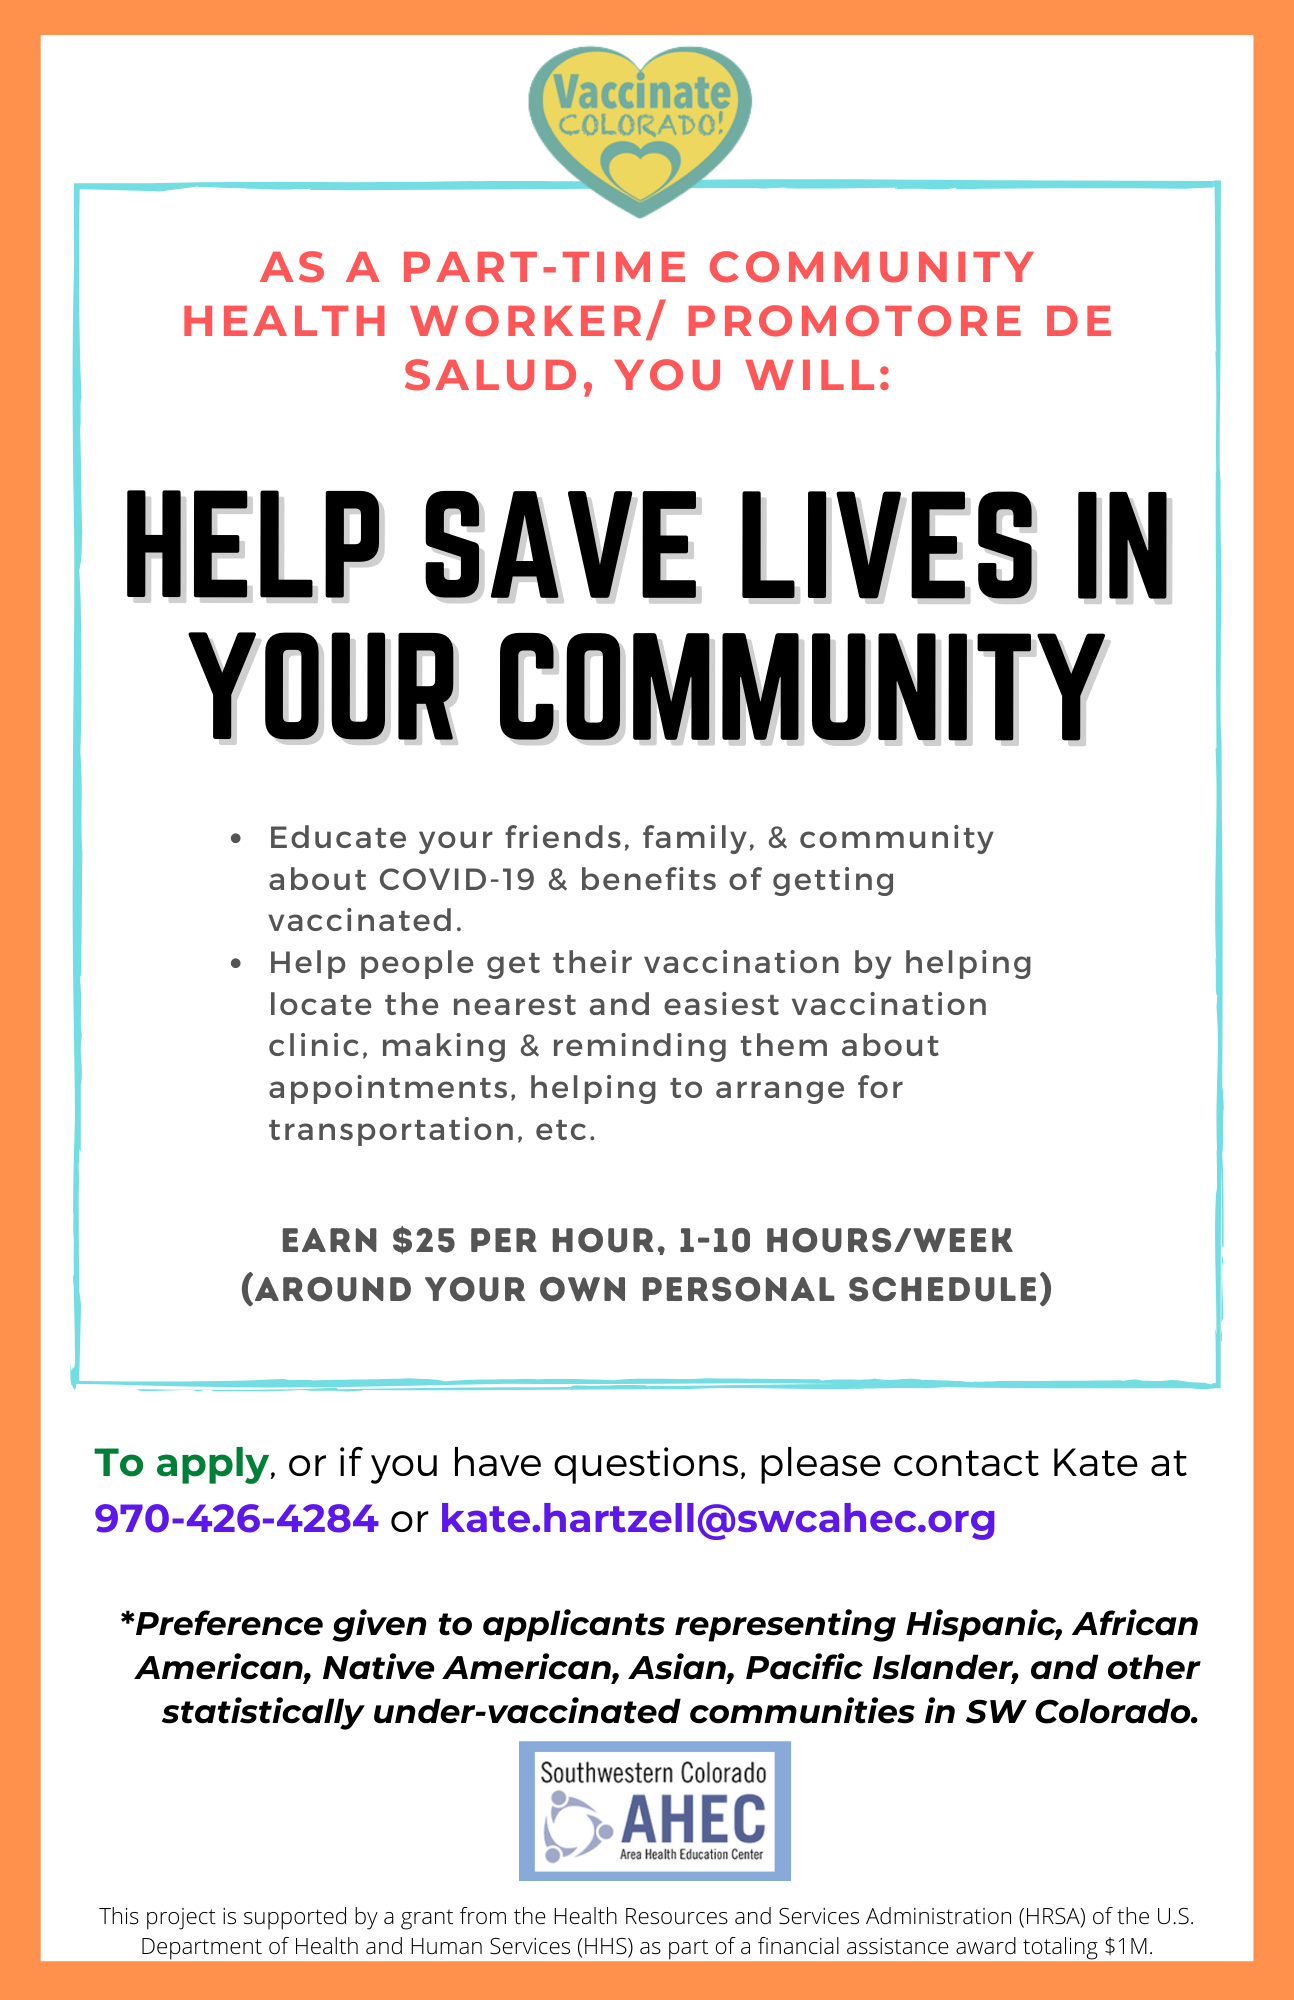 Help save lives in your community